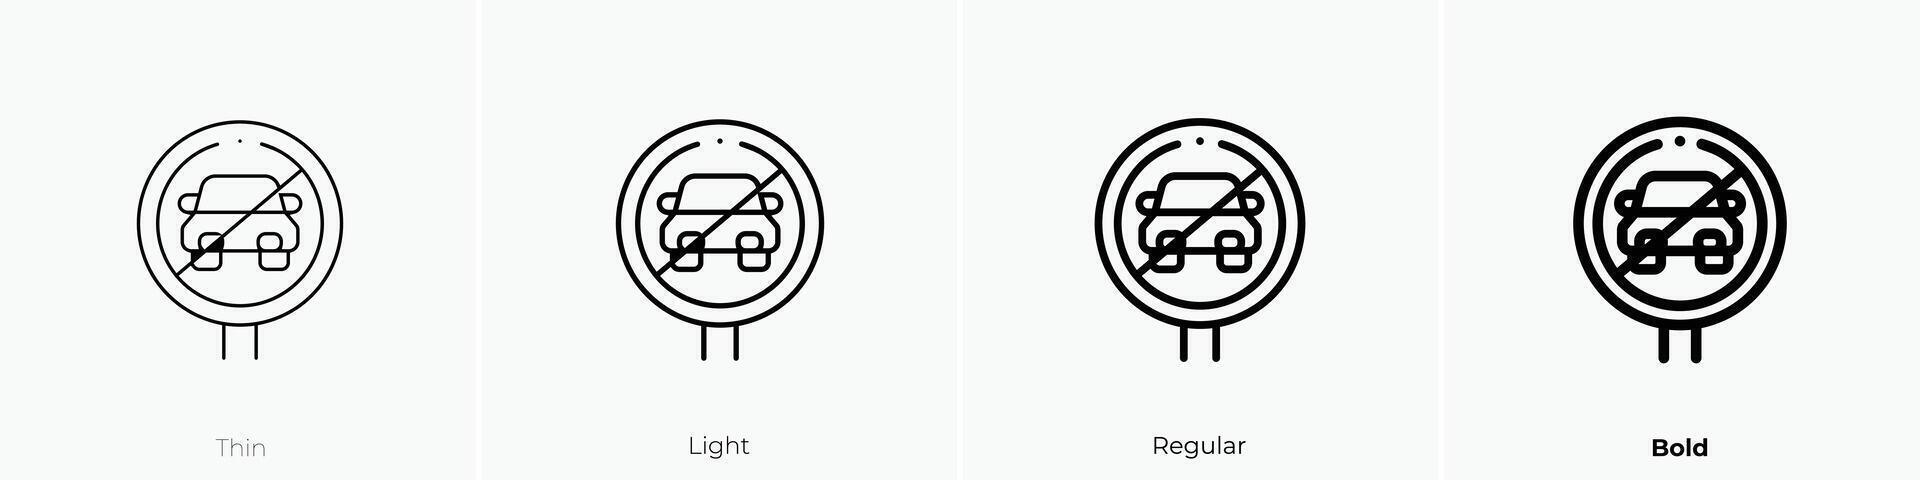 no parking icon. Thin, Light, Regular And Bold style design isolated on white background vector